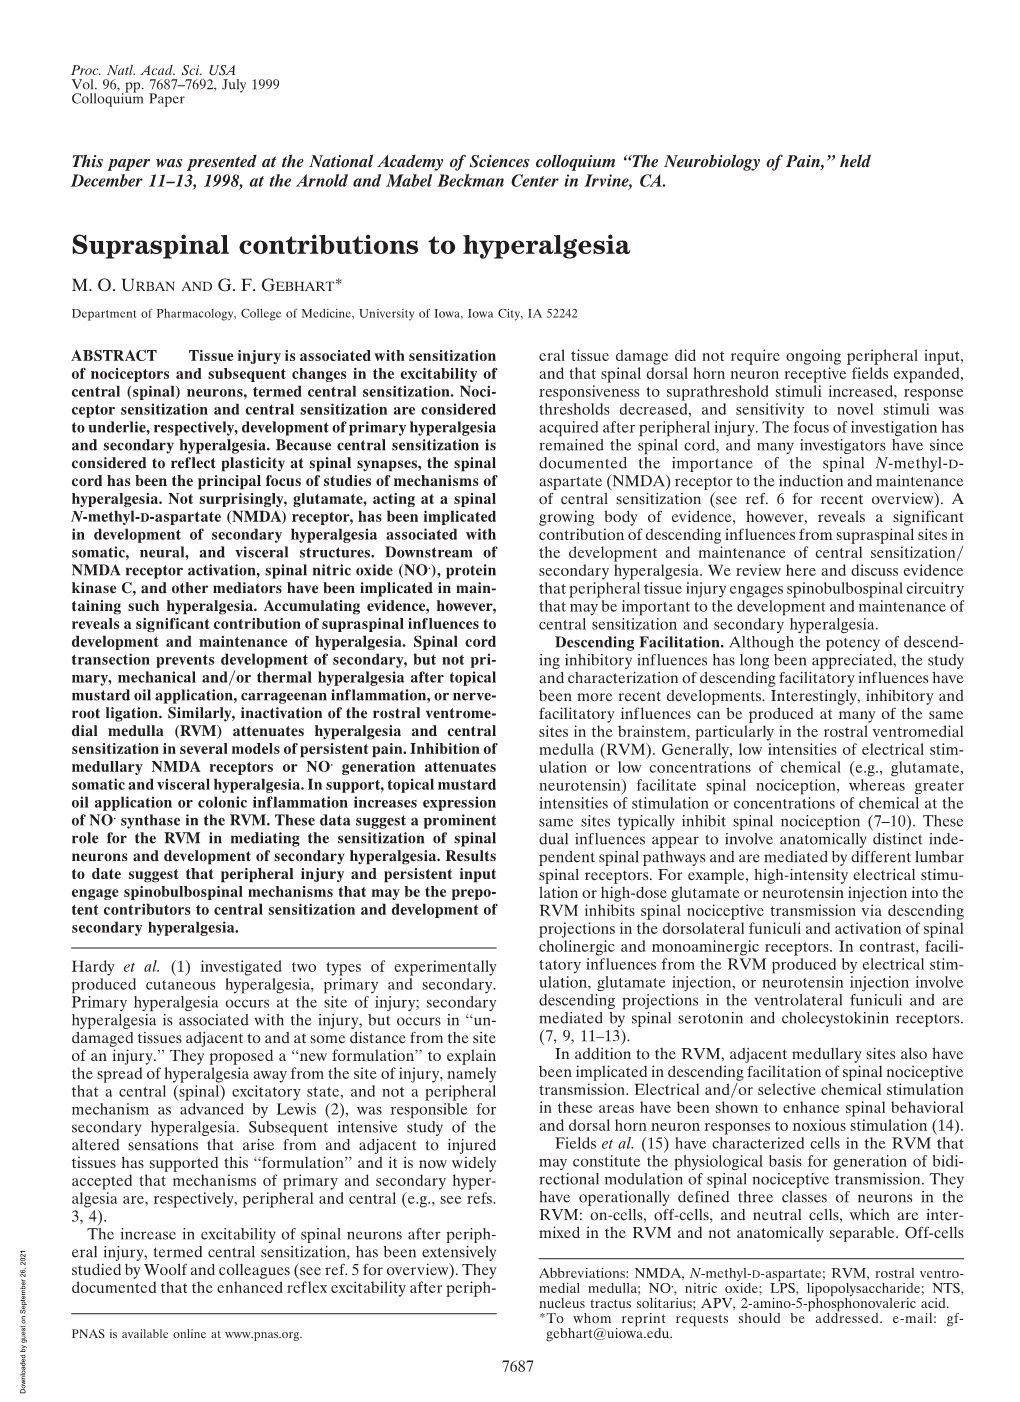 Supraspinal Contributions to Hyperalgesia